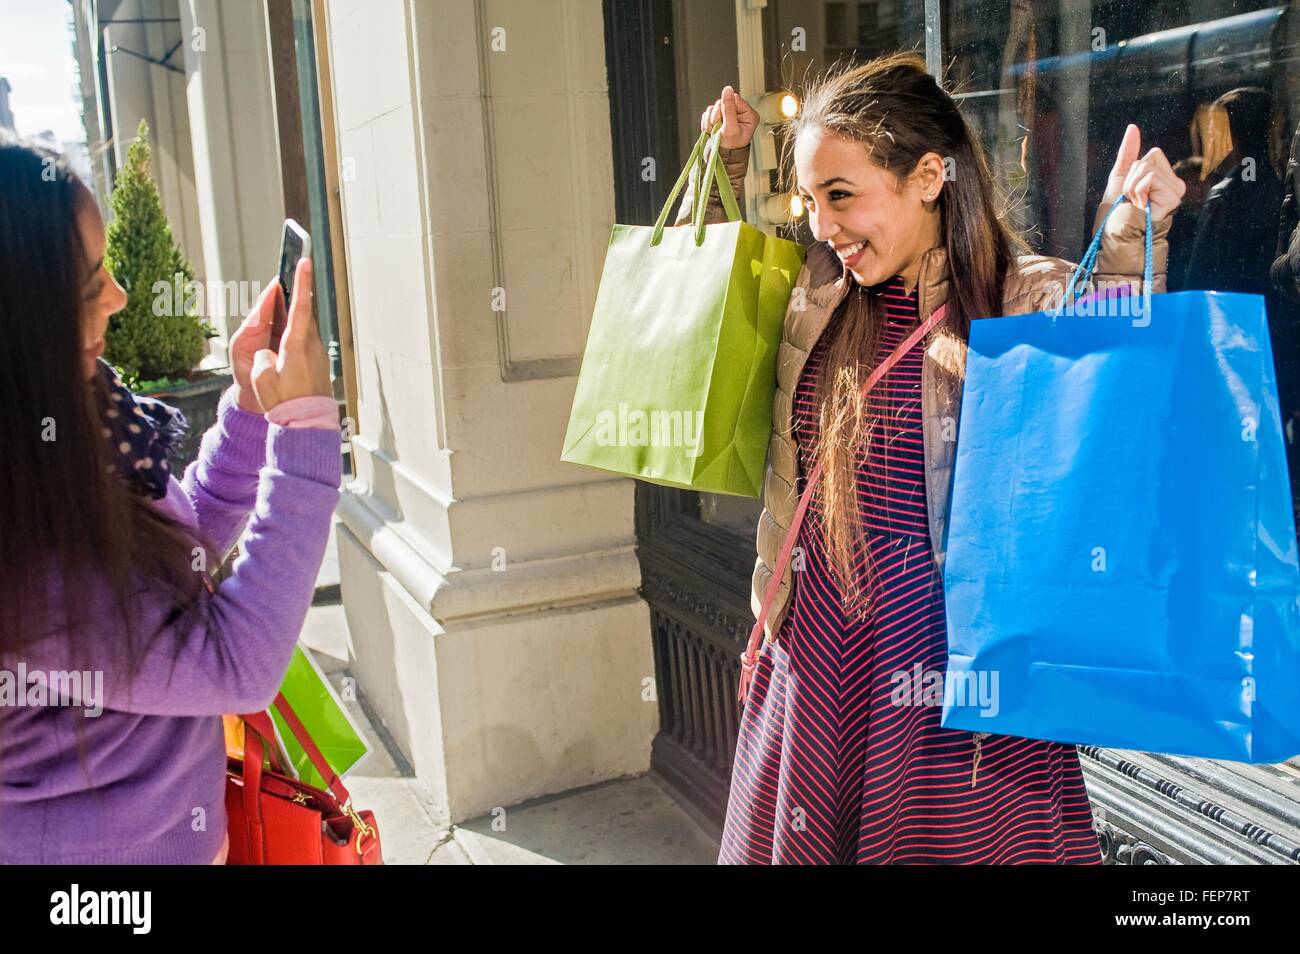 Young female adult twins in city photographing each other with shopping bags on smartphone Stock Photo